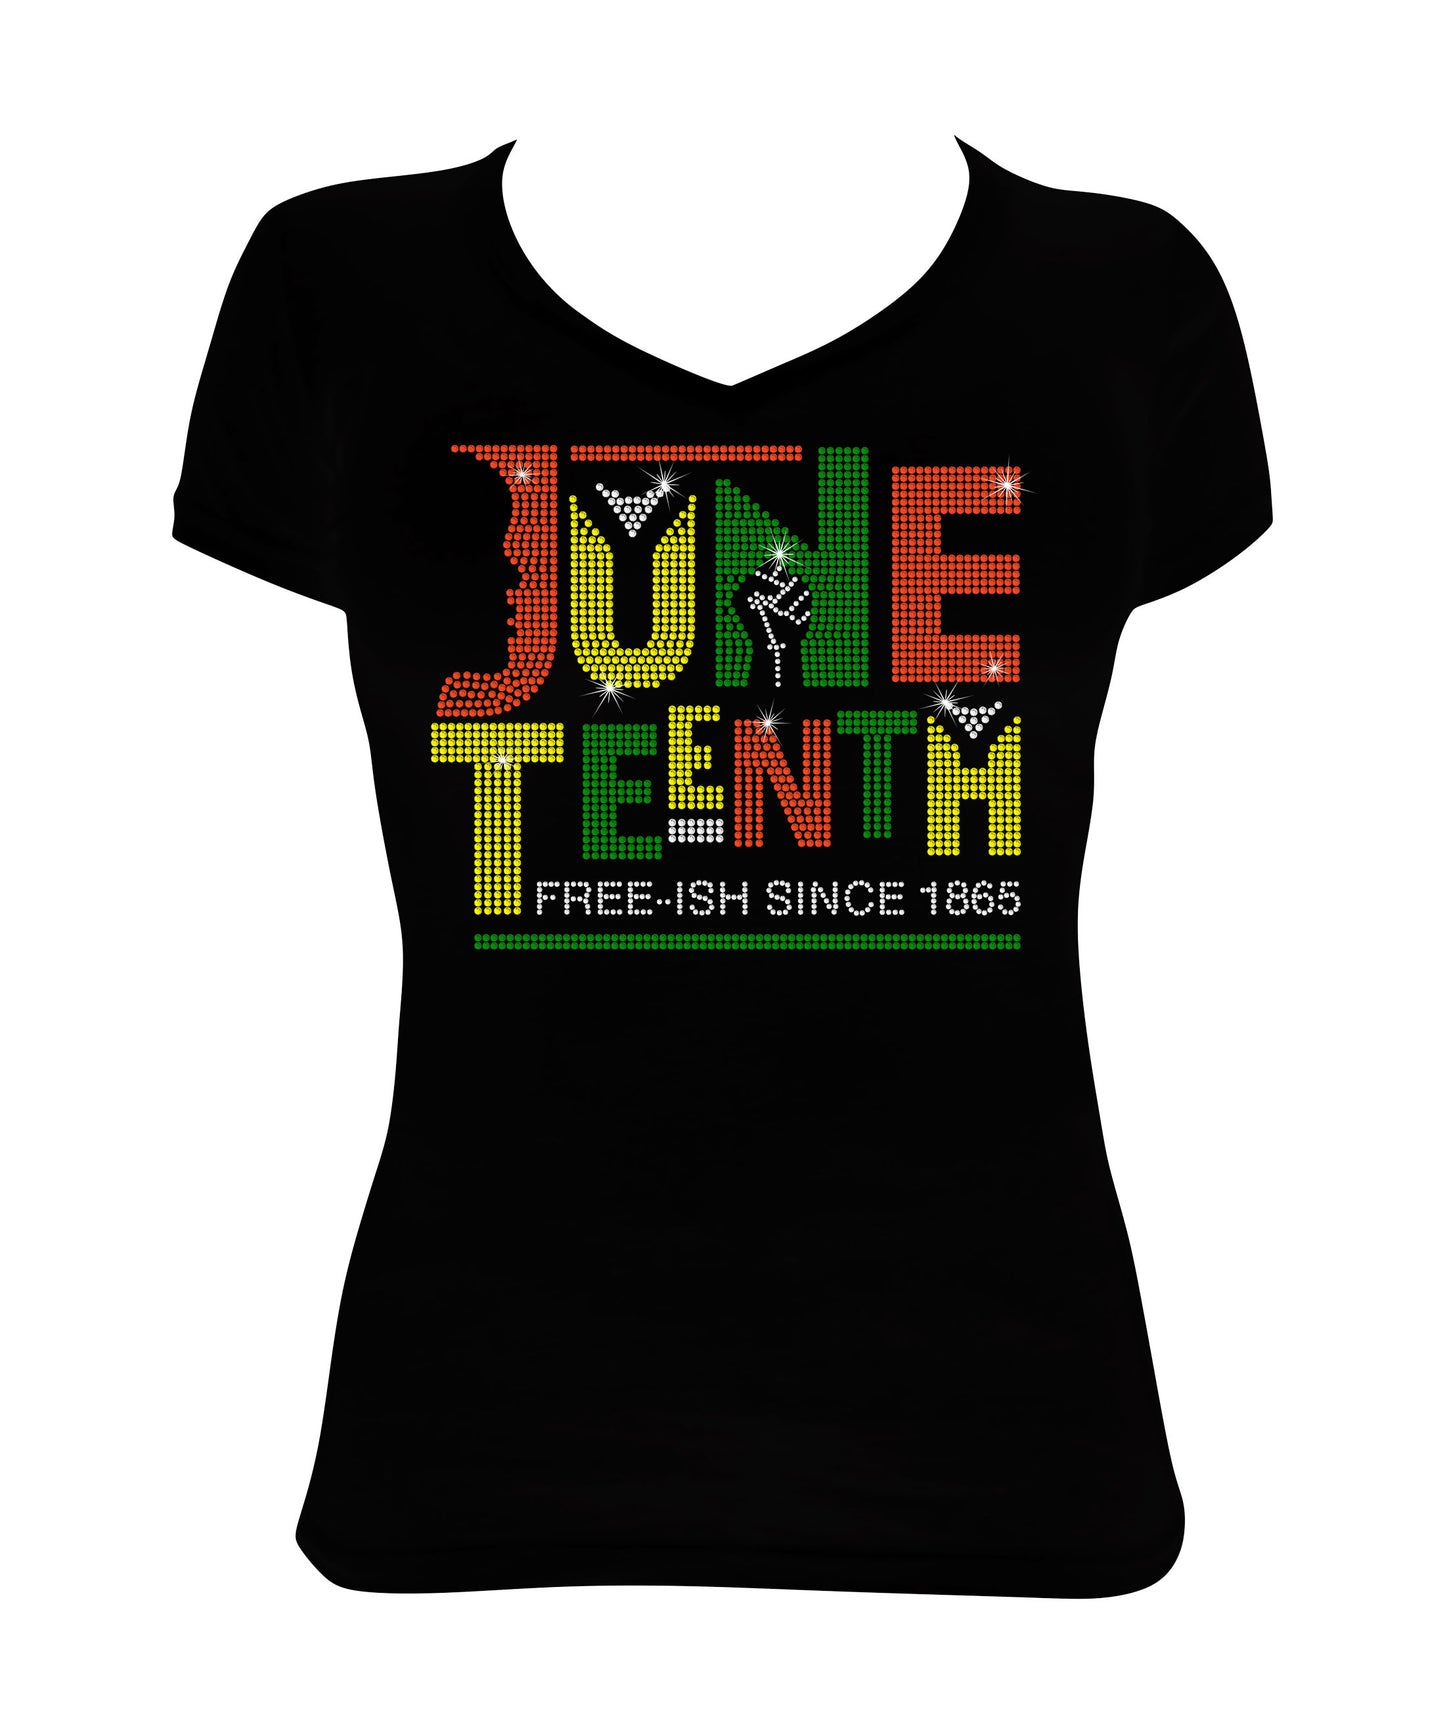 Juneteenth Free-ish Since 1865 - Juneteenth Shirt with Fist